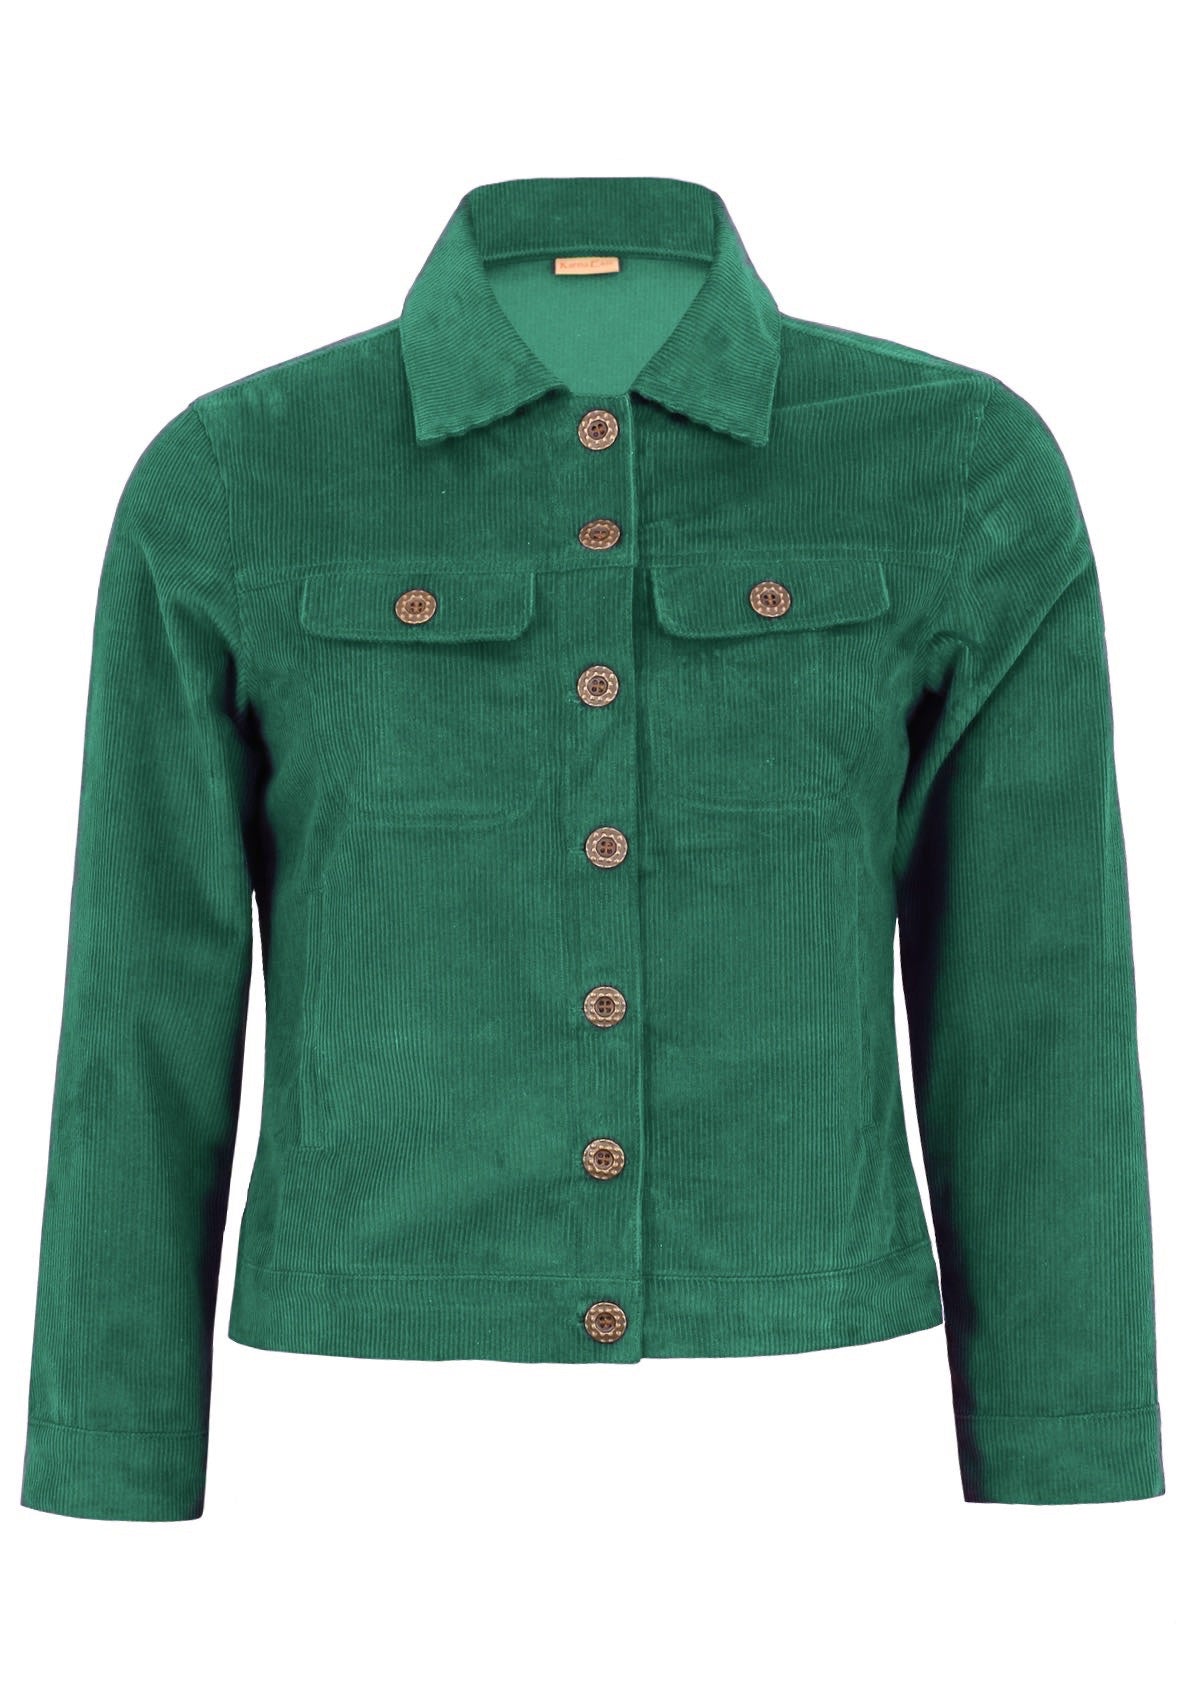 Hunter Green 100% cotton corduroy jacket with long sleeves. 